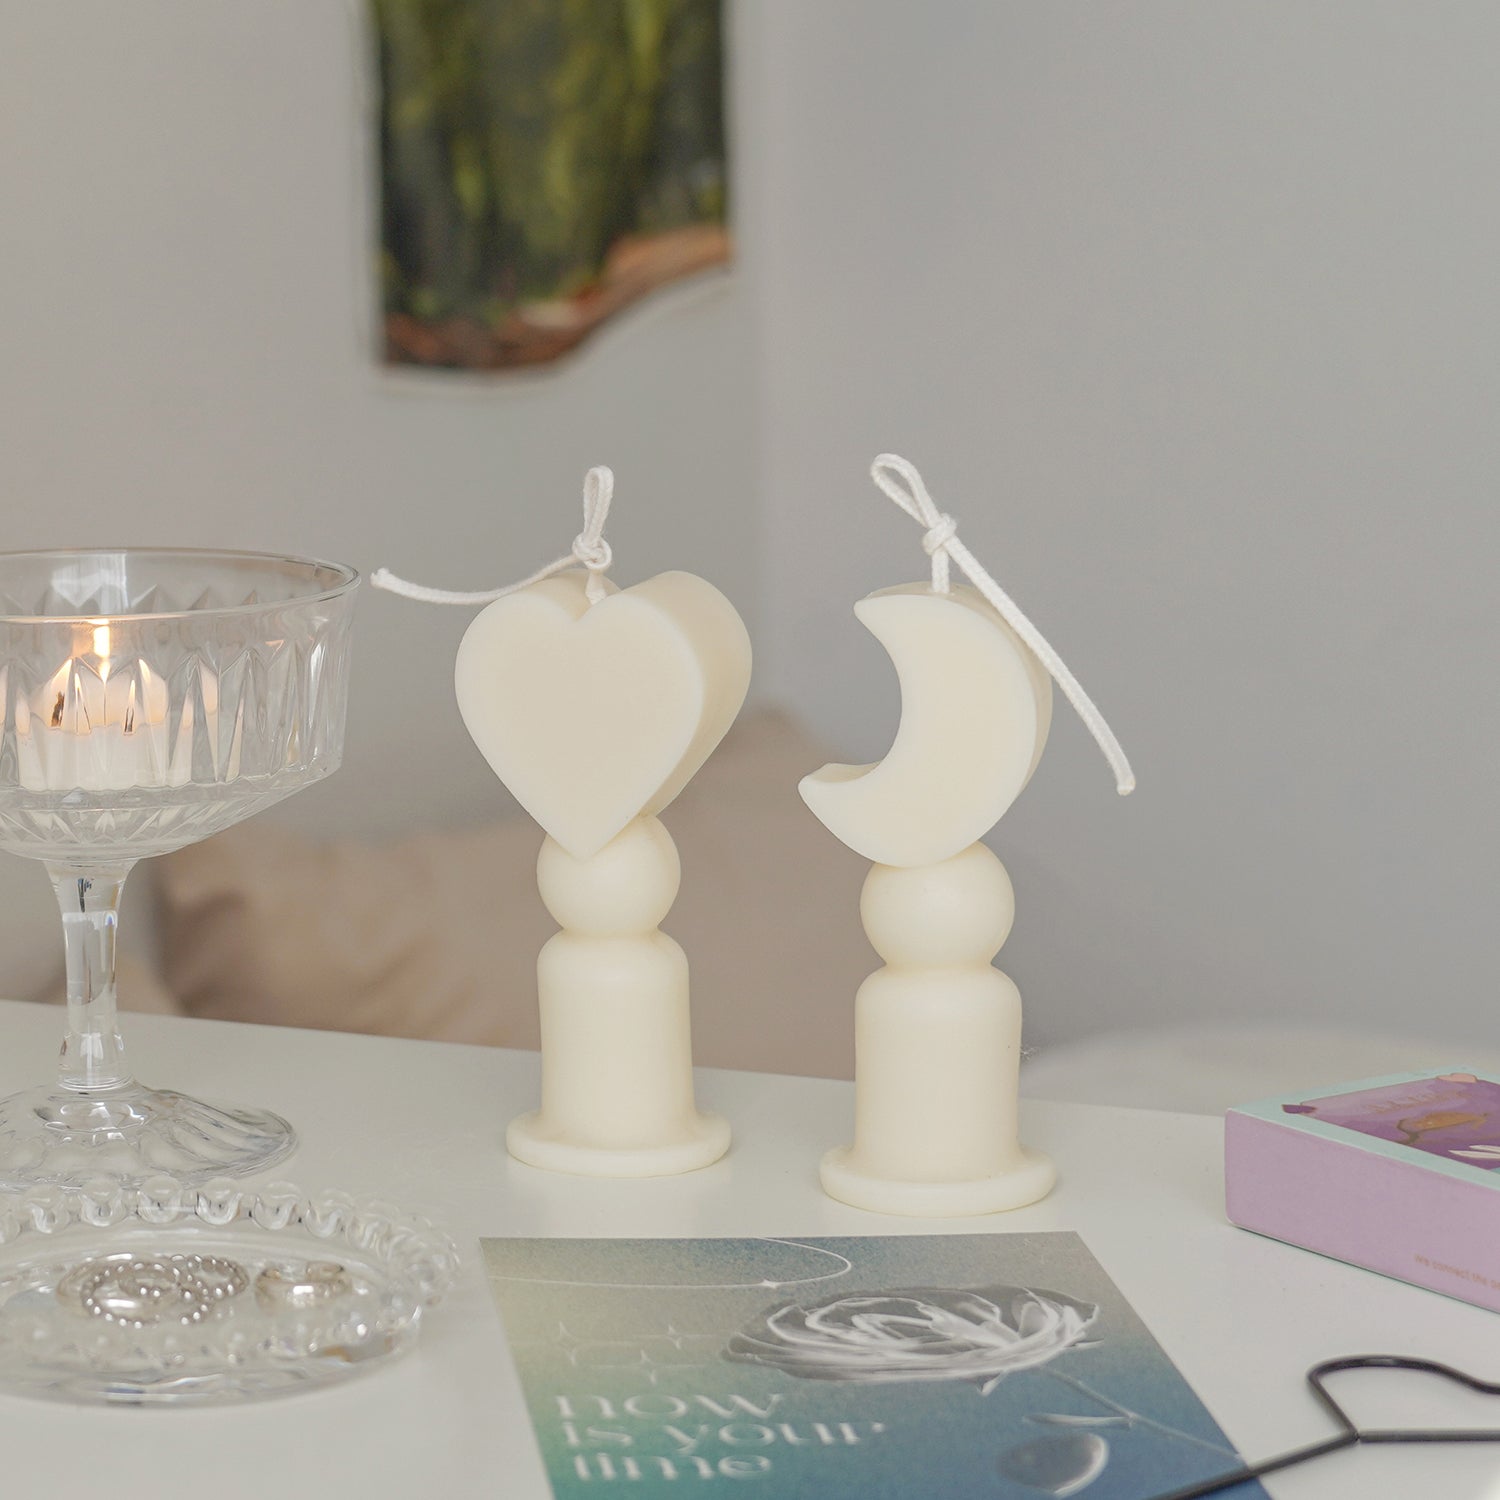 Heart shape candle, crescent moon shape candles, a lit tealight candle in a glass coupe, blue postcard, match box, black heart shape wick dipper, and silver rings on clear beaded tray are place on white drawer. The arrangement exudes minimal aesthetic dreamy vibes.